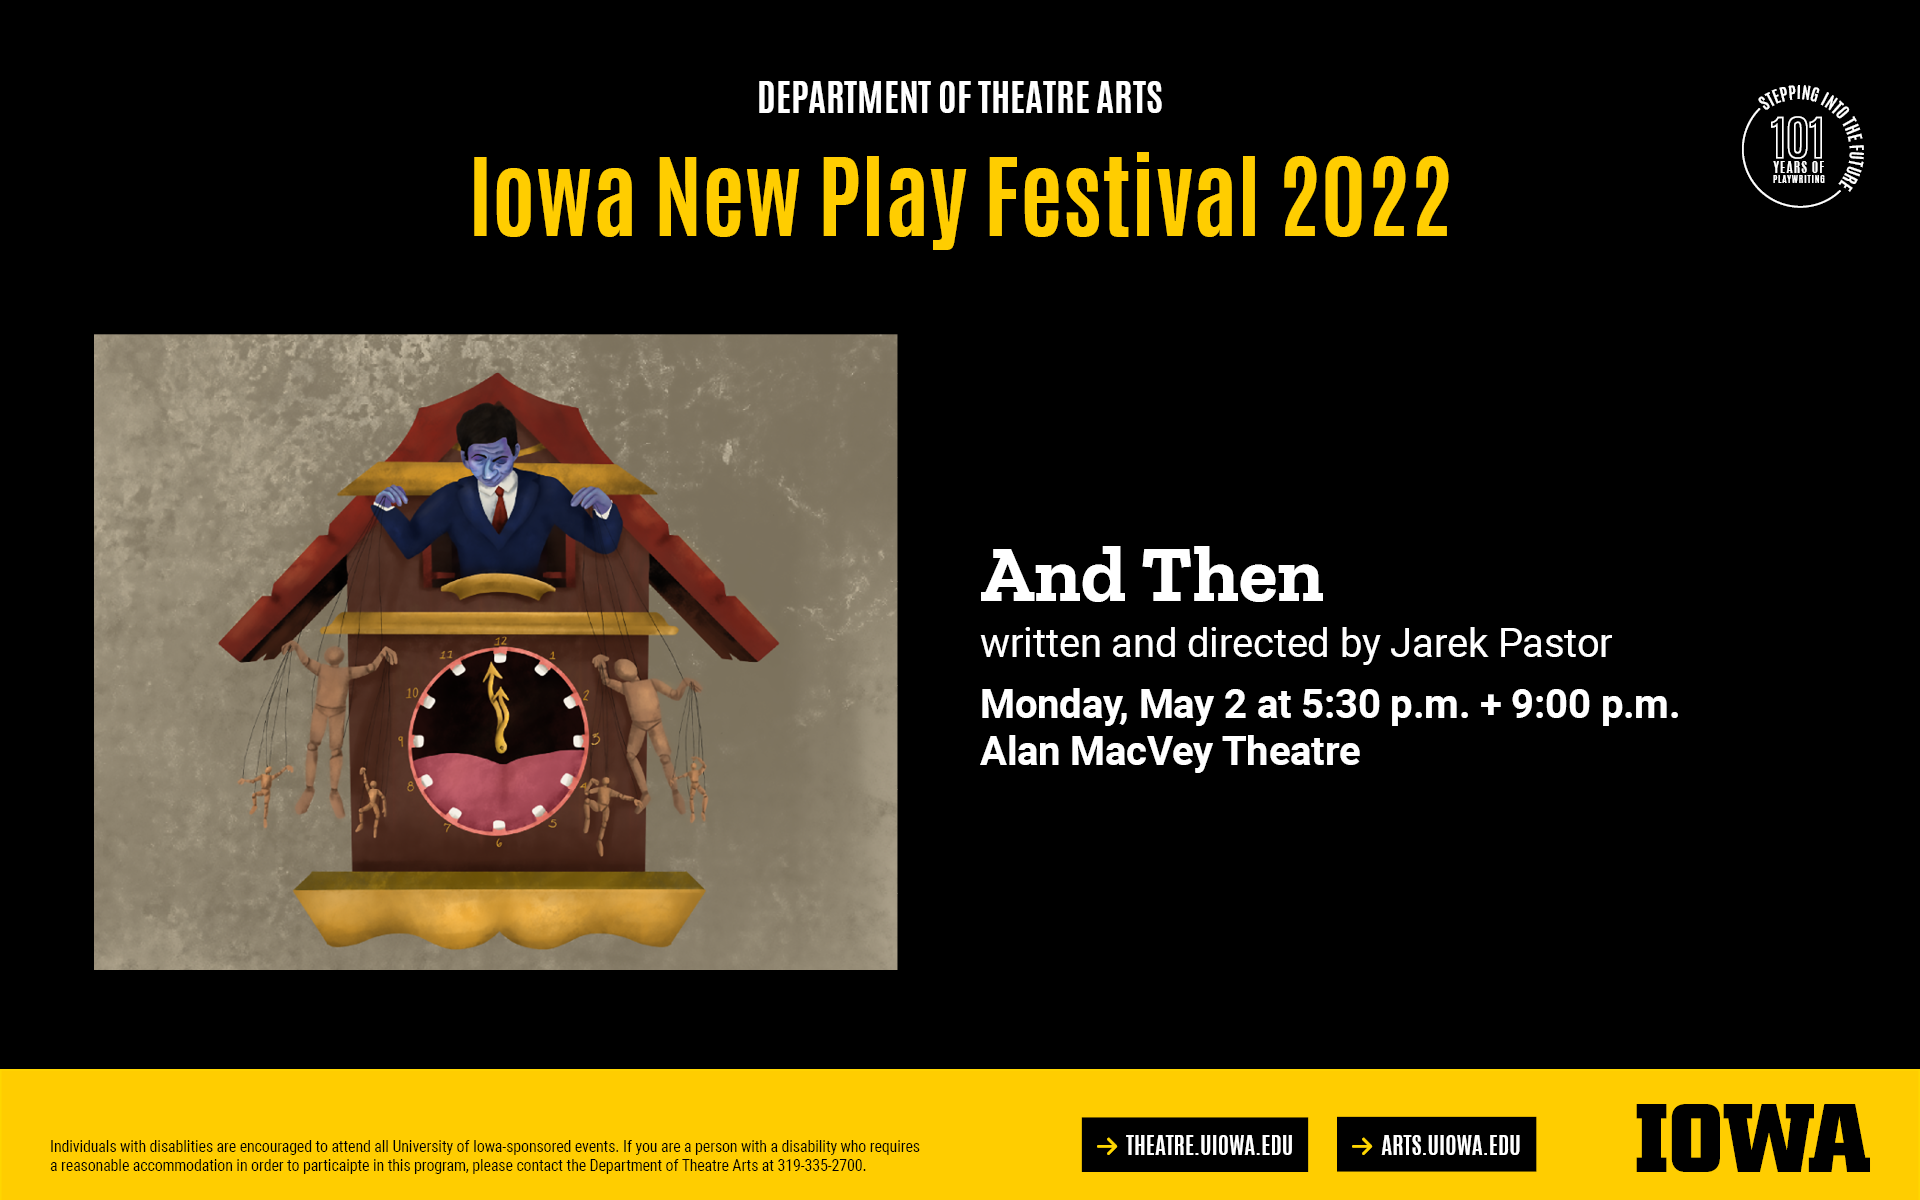 Iowa New Play Festival. And Then. Written and directed by Jarek Pastor. Monday, May 2 at 5:30PM and 9PM, Alan MacVey Theatre.Individuals with disablities are encouraged to attend all University of Iowa-sponsored events. If you are a person with a disability who requires  a reasonable accommodation in order to particaipte in this program, please contact the Department of Theatre Arts at 319-335-2700.